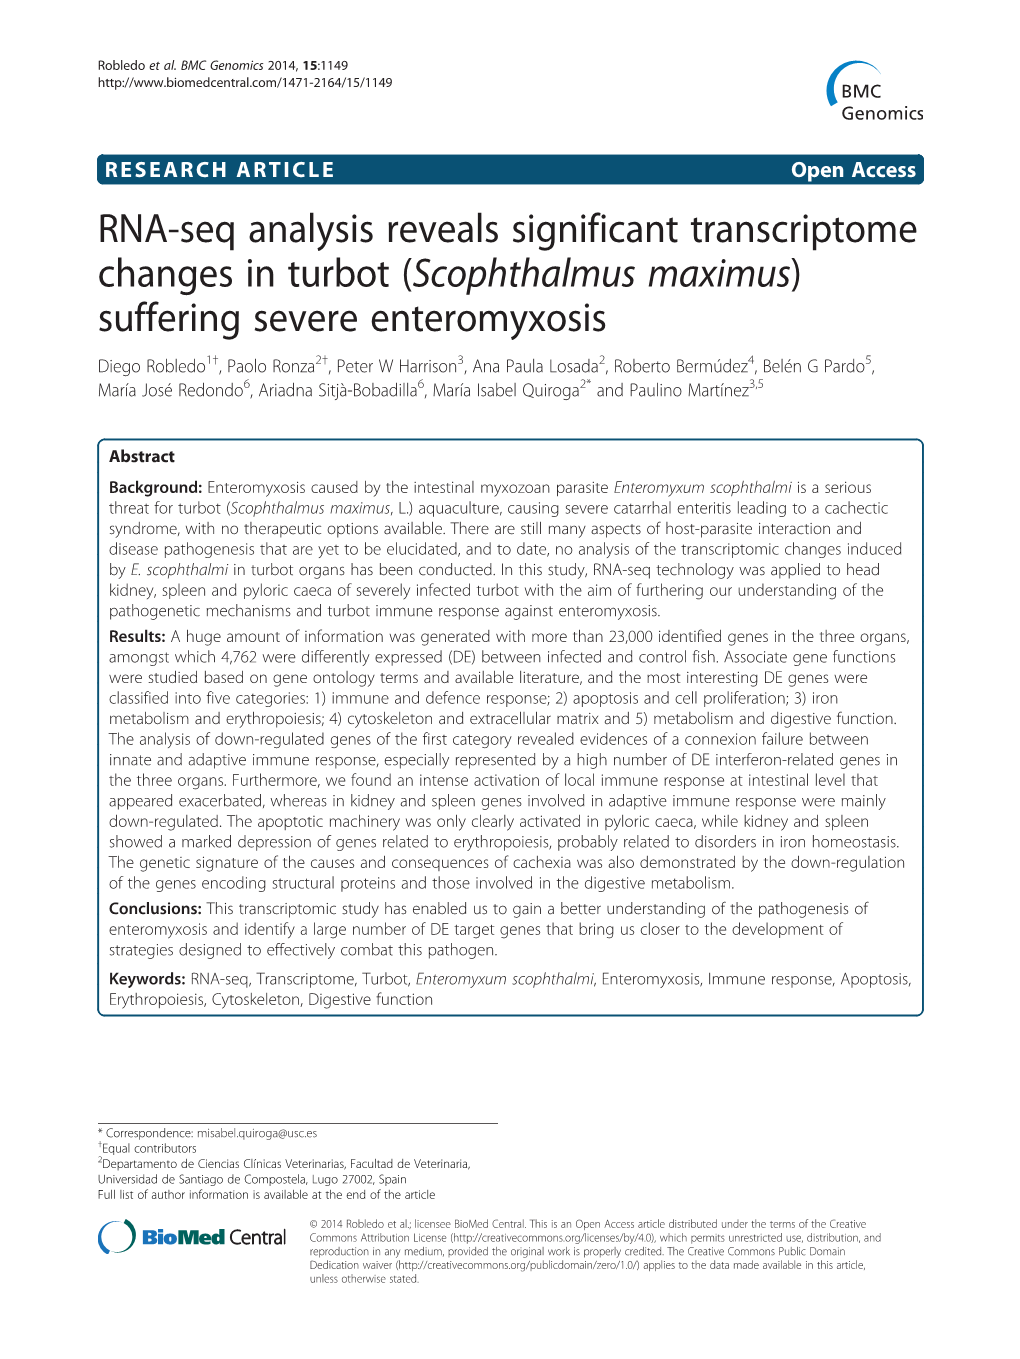 RNA-Seq Analysis Reveals Significant Transcriptome Changes in Turbot (Scophthalmus Maximus) Suffering Severe Enteromyxosis